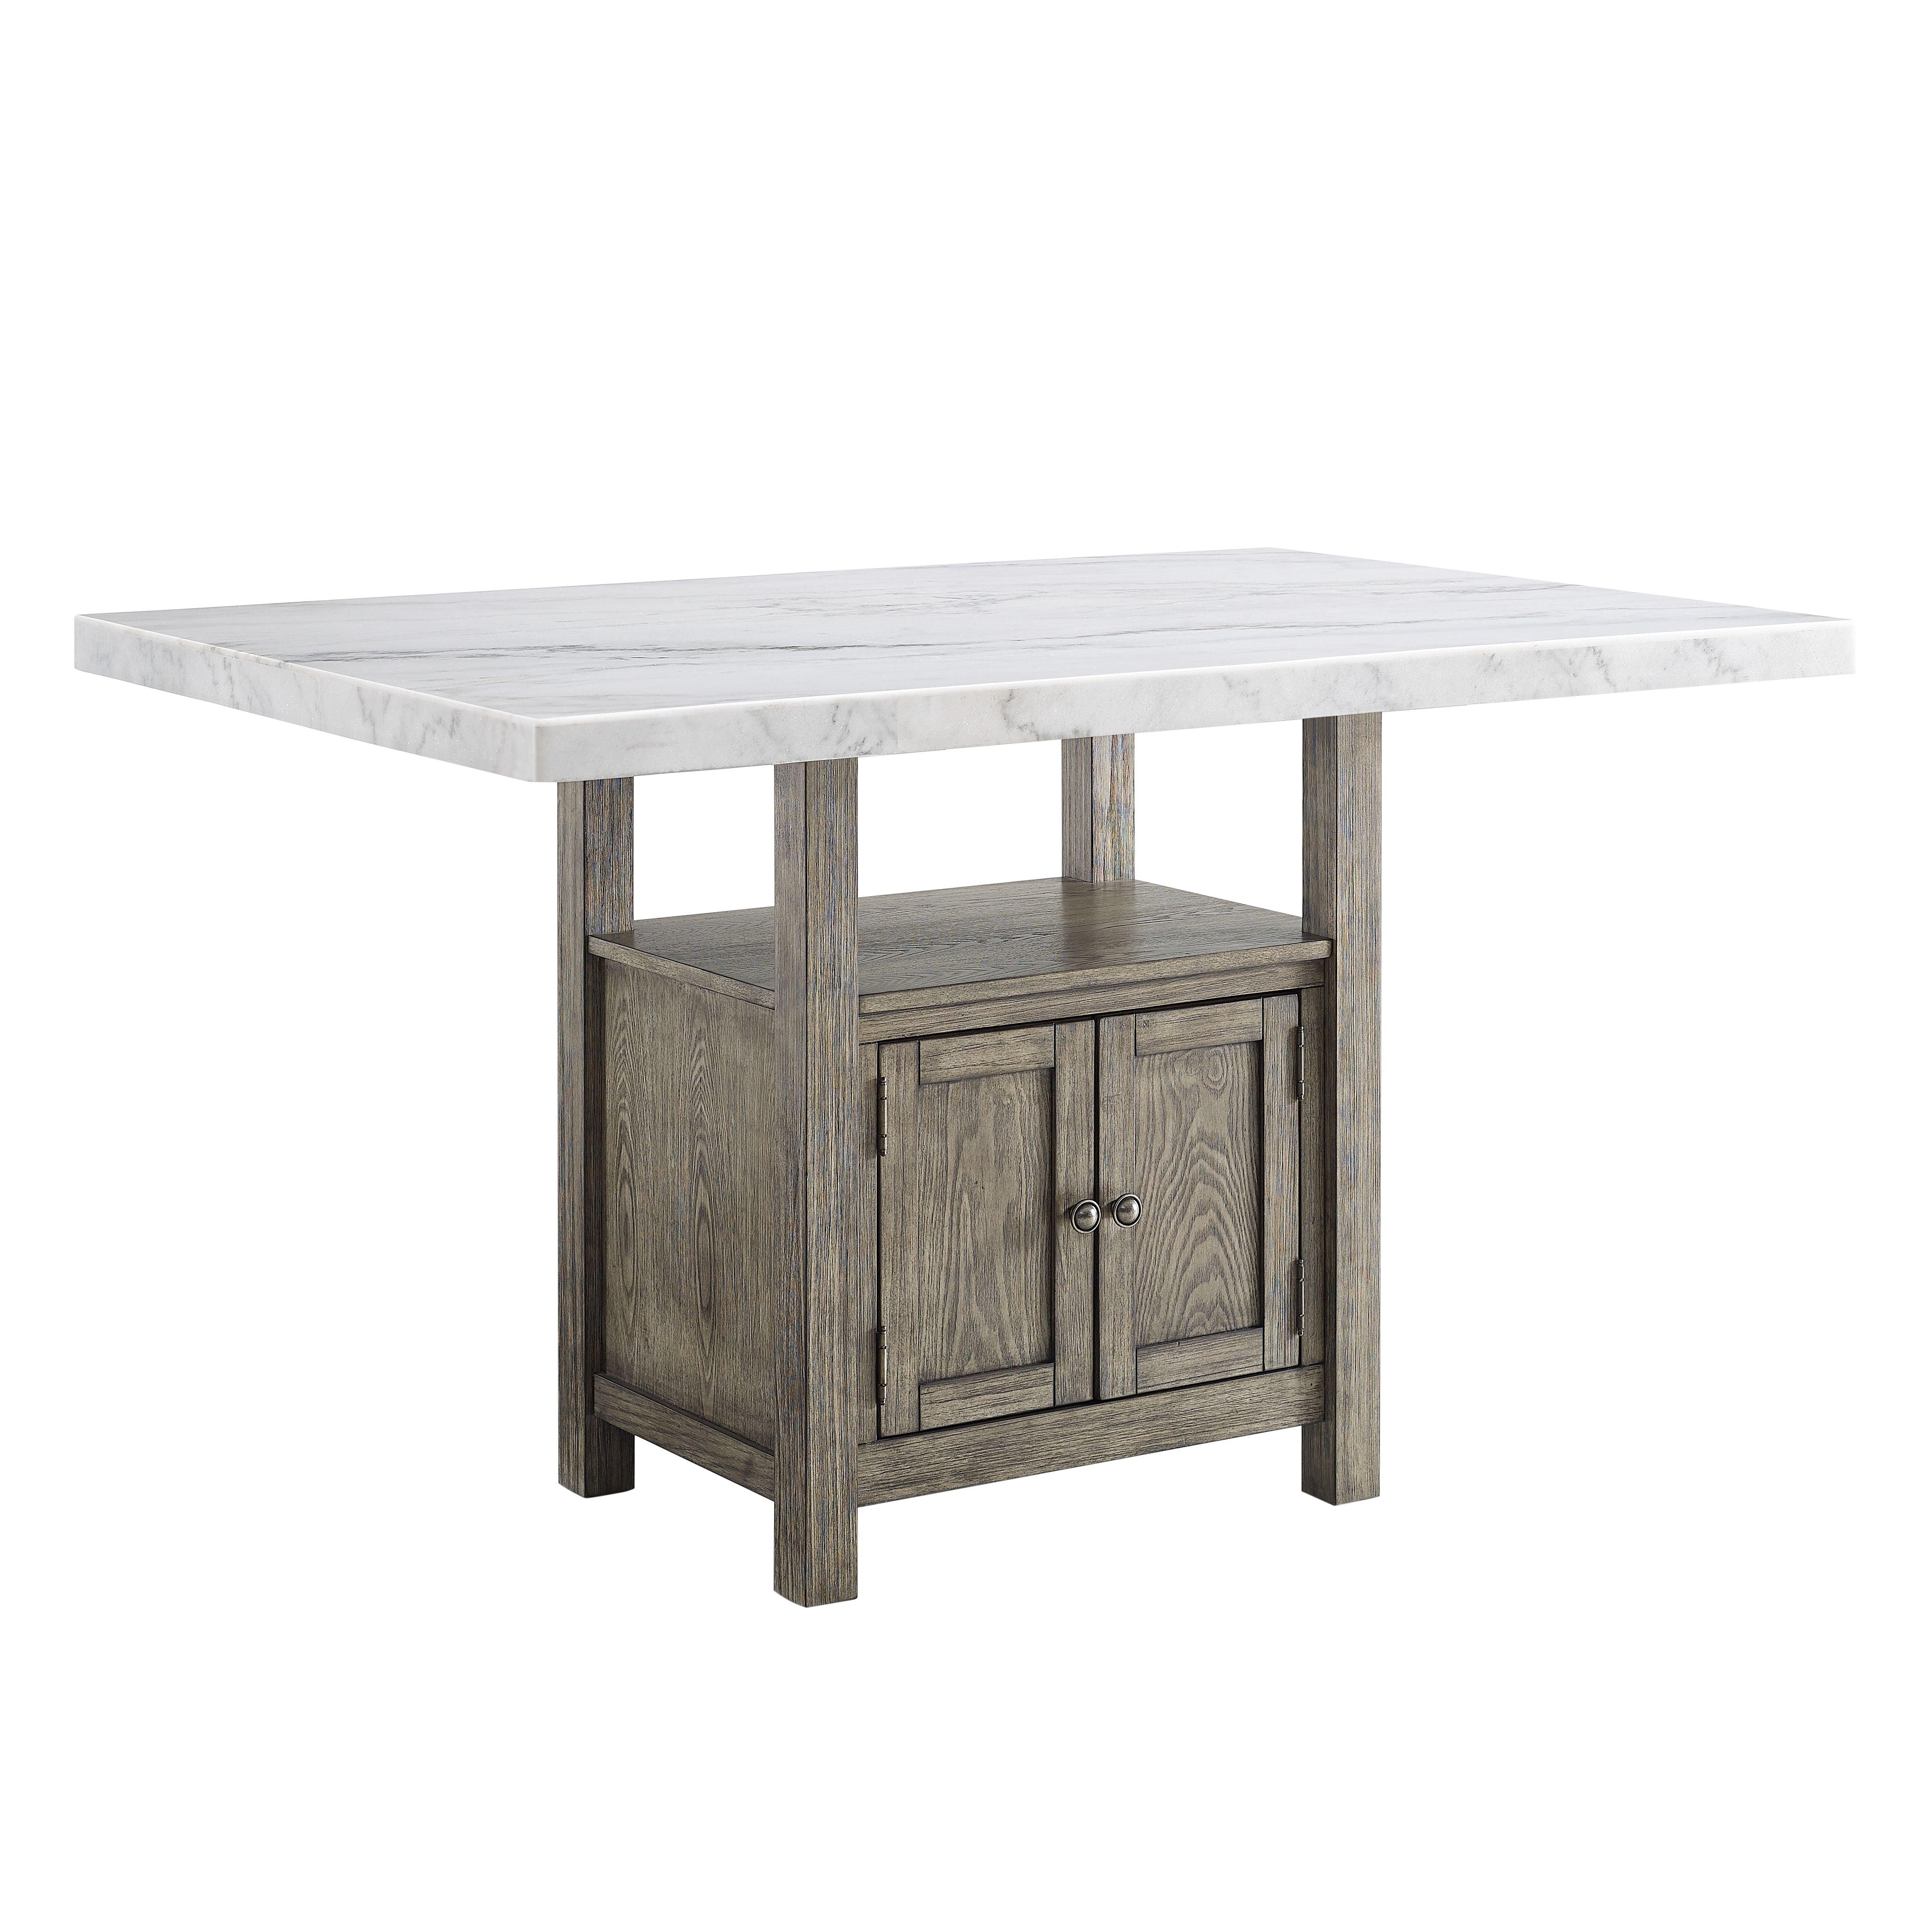 Steve Silver Furniture - Grayson - Counter Height Dining Table - Dark Gray - 5th Avenue Furniture